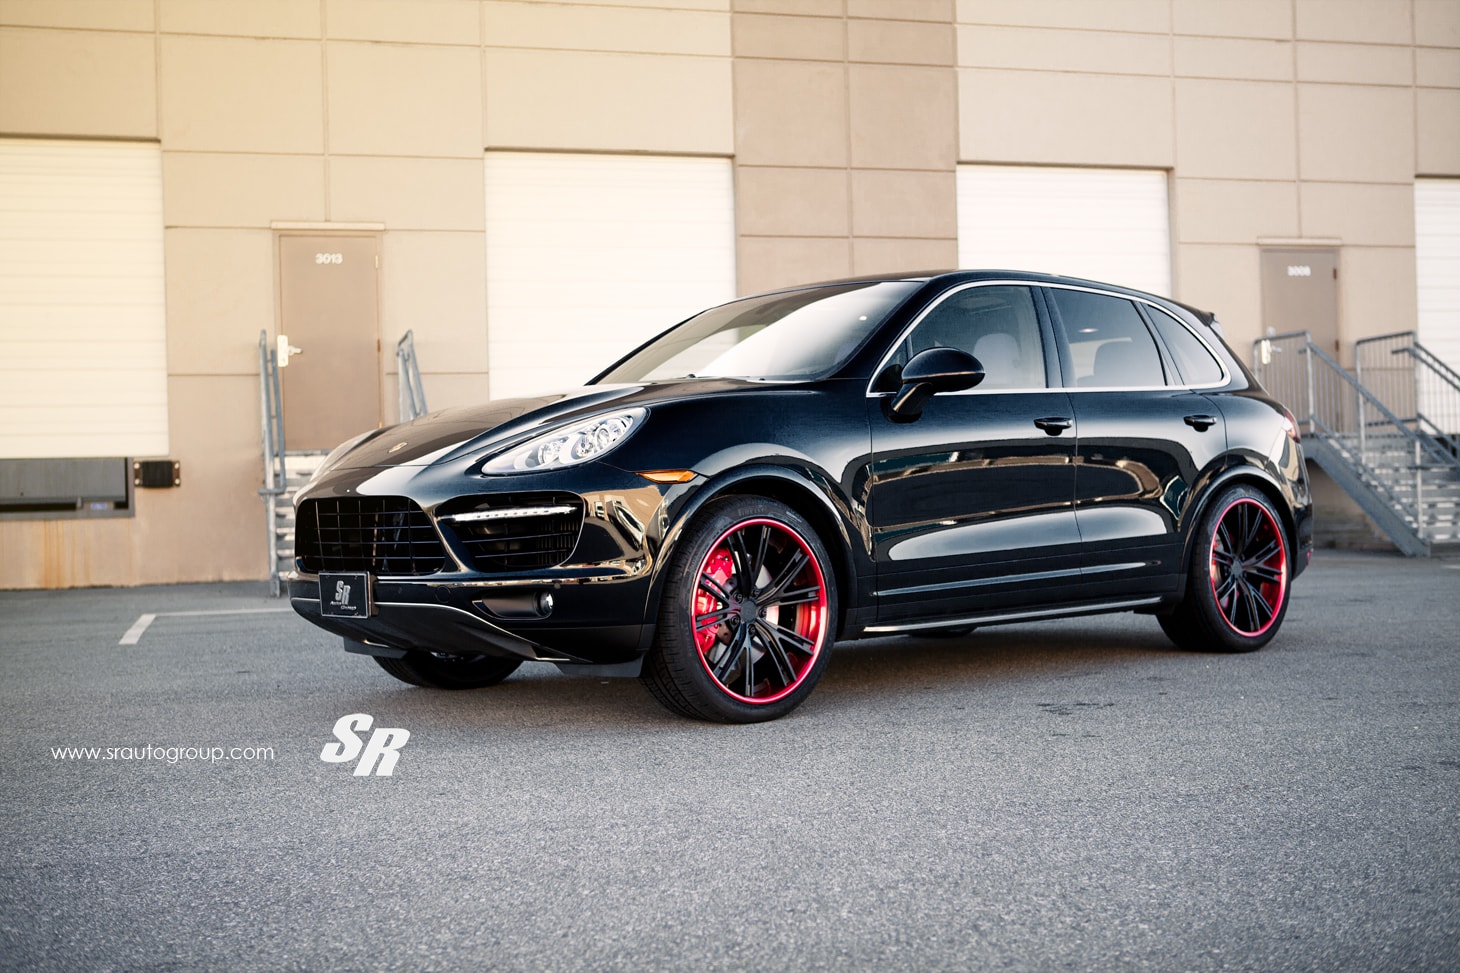 Porsche Cayenne Turbo S Gets 22s From Pur Autoevolution